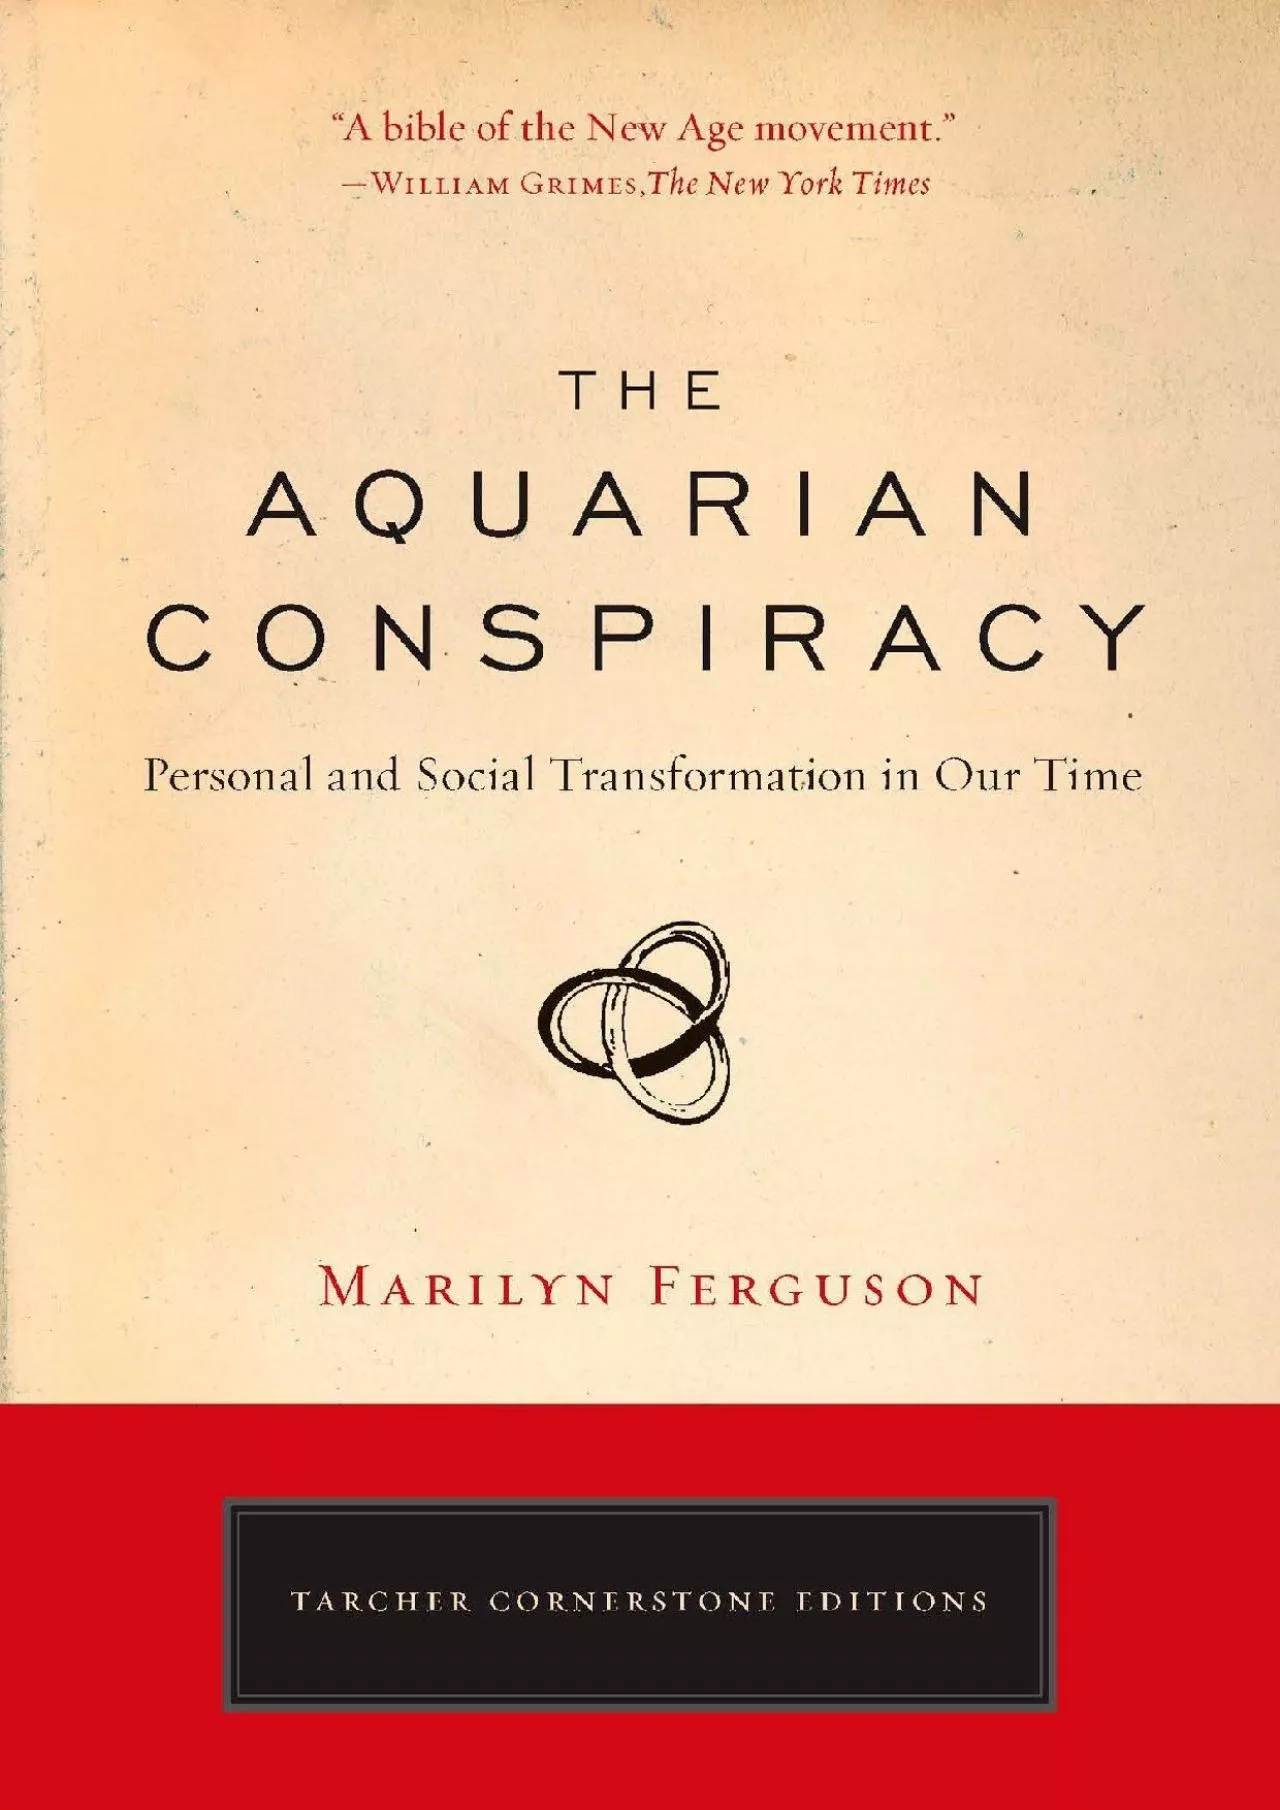 (EBOOK)-The Aquarian Conspiracy: Personal and Social Transformation in Our Time (The Tarcher